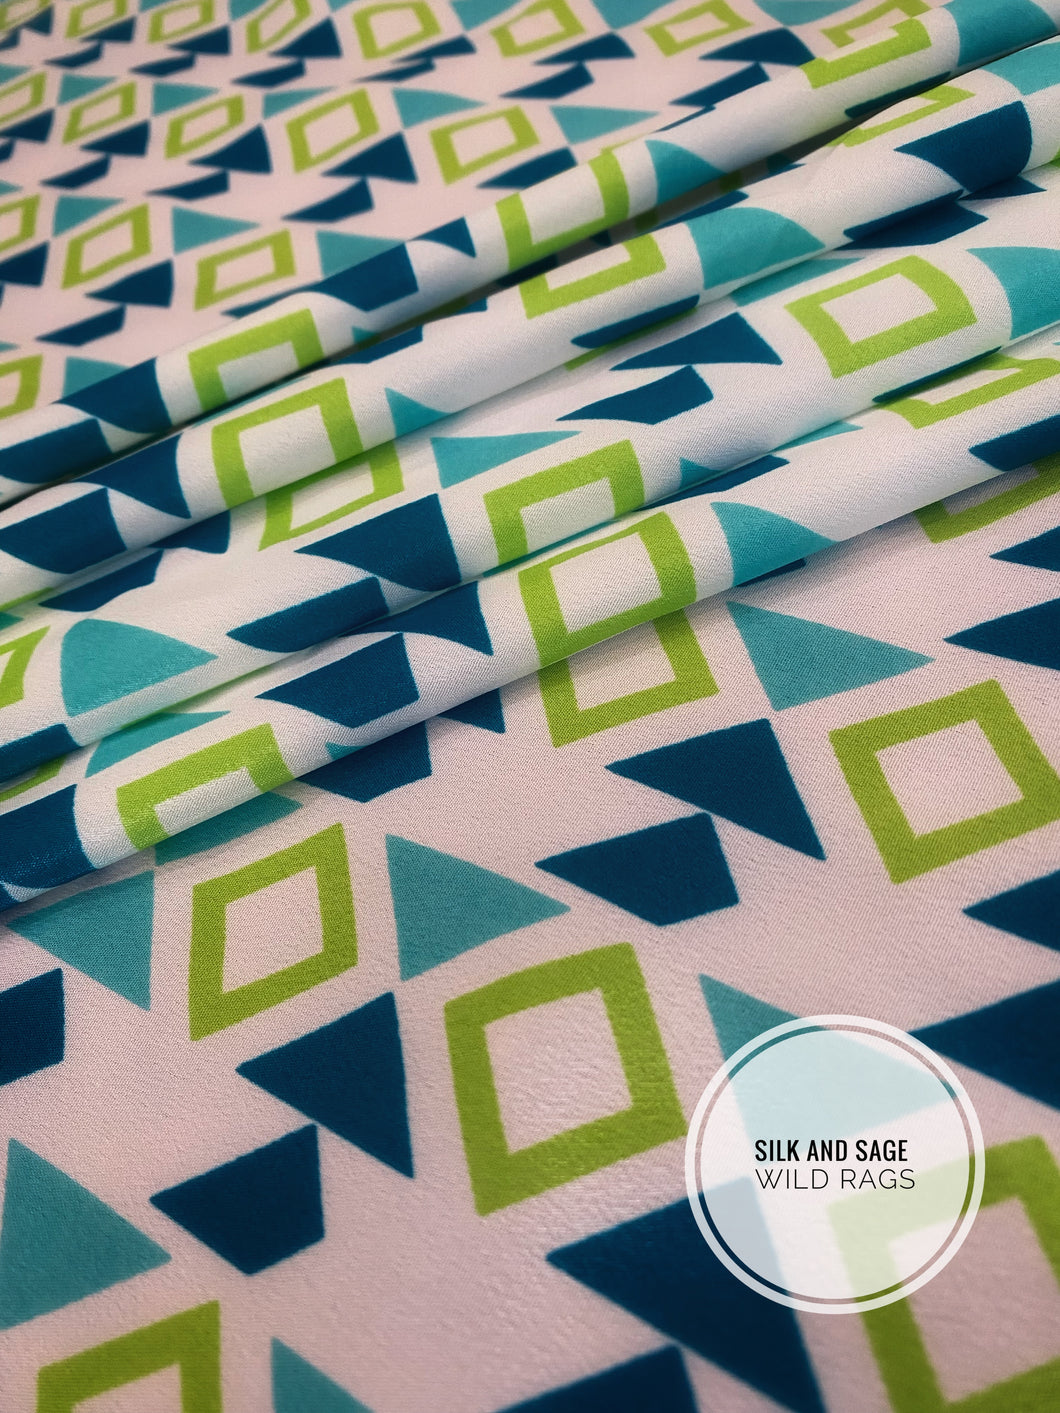 Boho, tribal, Aztec print. Light blue, teal, turquoise, lime green and white tone silky cdc fabric.